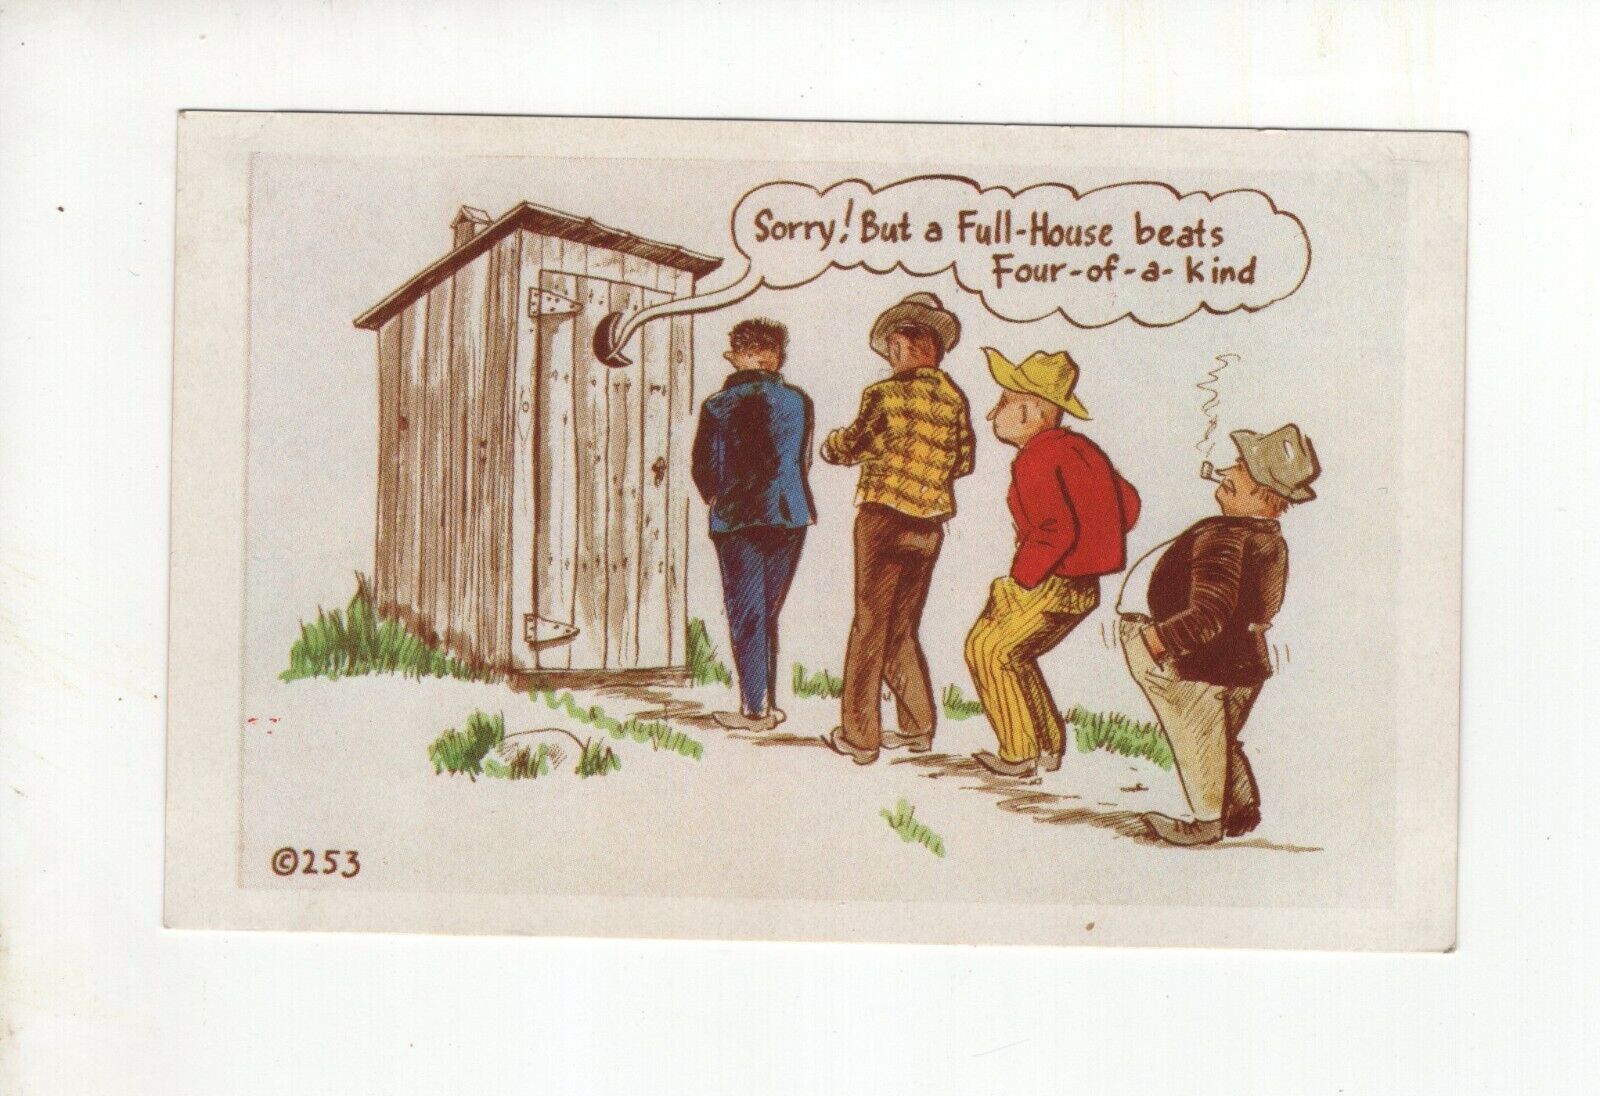 Vintage Comic Post Card - Sorry But a Full-House beats Four-of-a-Kind